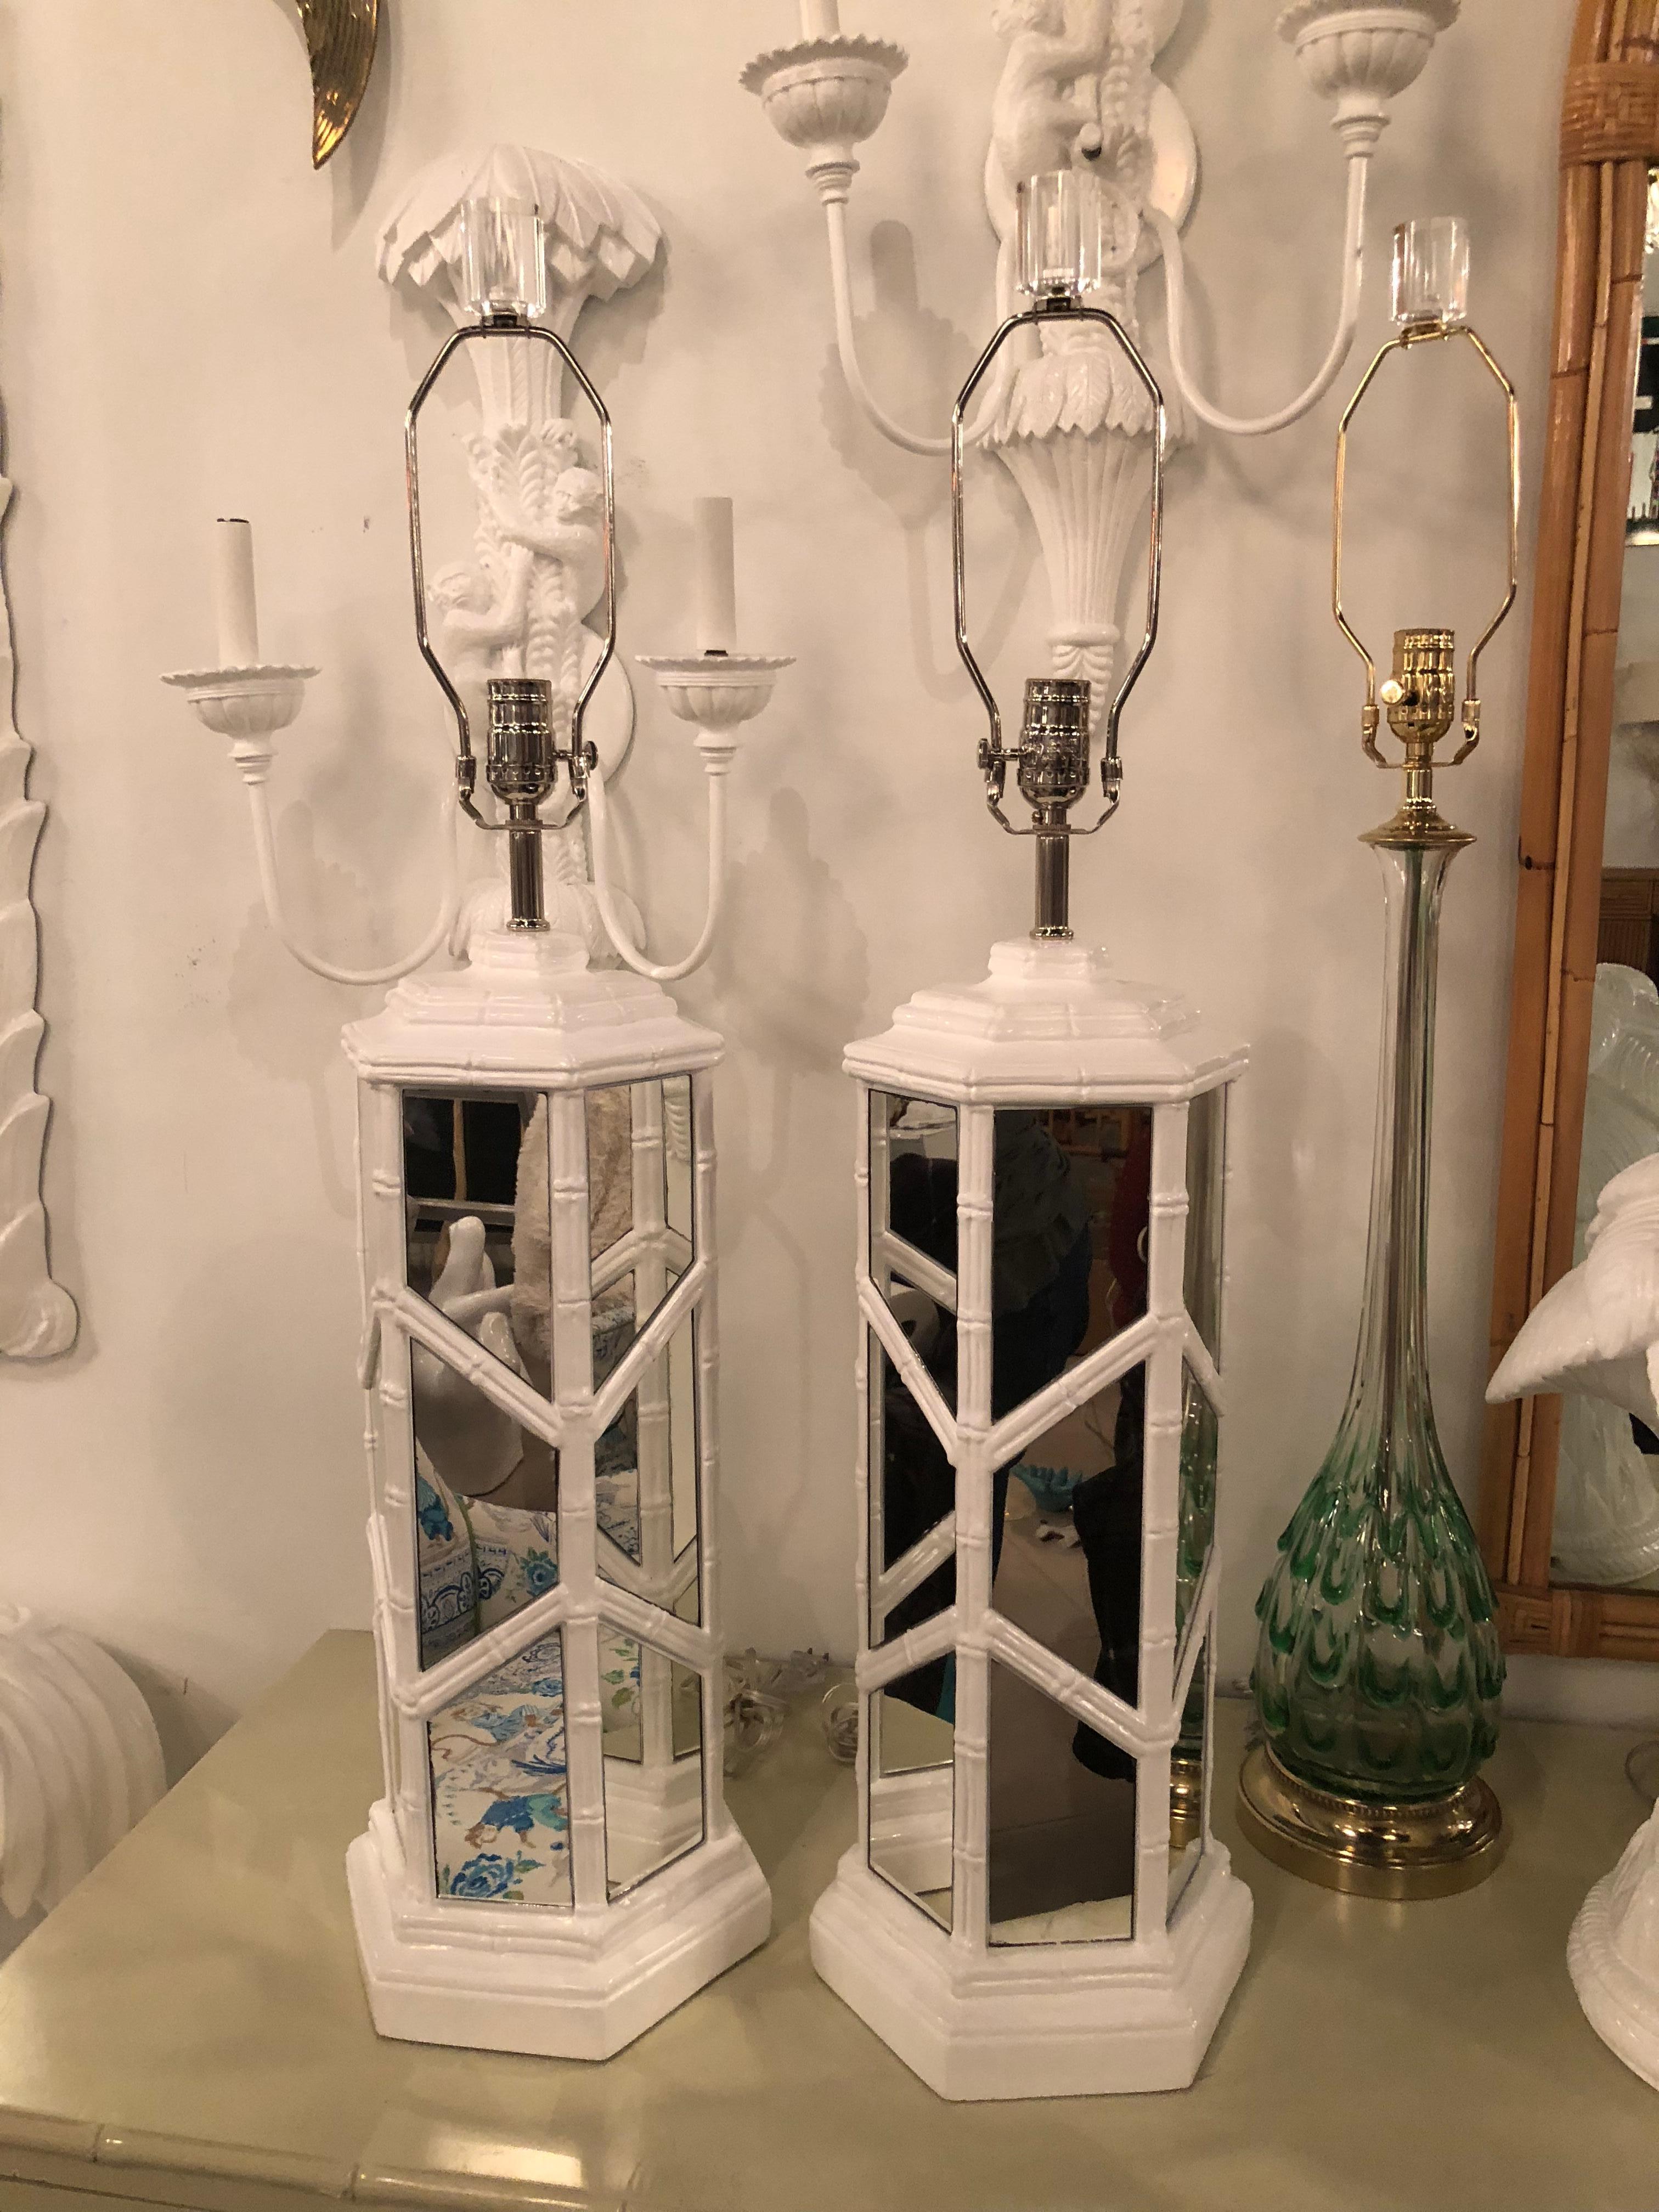 Pair of vintage faux bamboo, Chinese Chippendale, white lacquered mirrored table lamps. Newly wired, new chrome hardware. Original mirror may have some patina. Lucite finials.
Measures: 35 tall to top of finials.